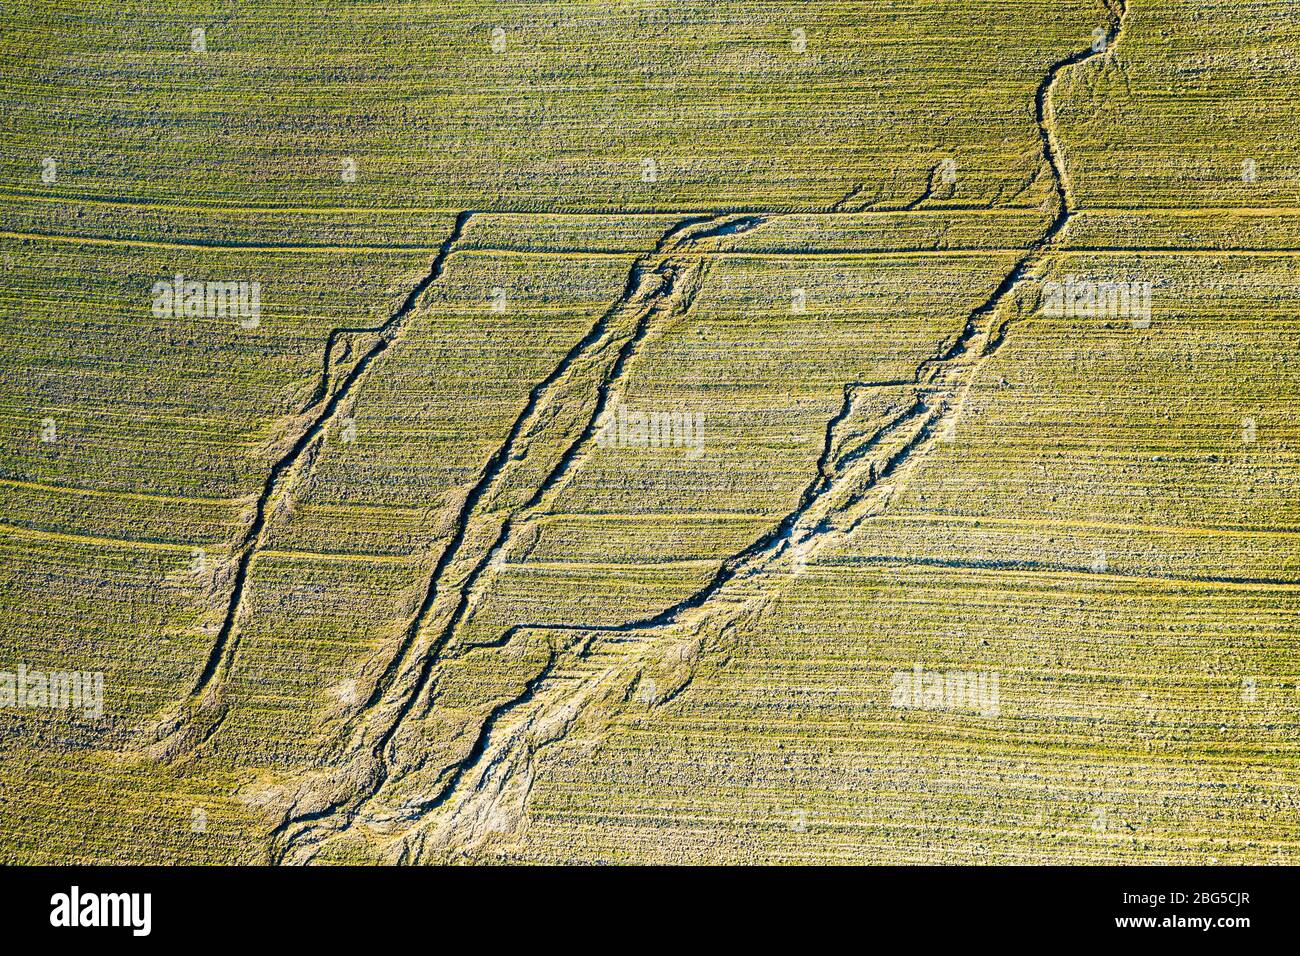 Agricultural landscape. Aerial view. Stock Photo